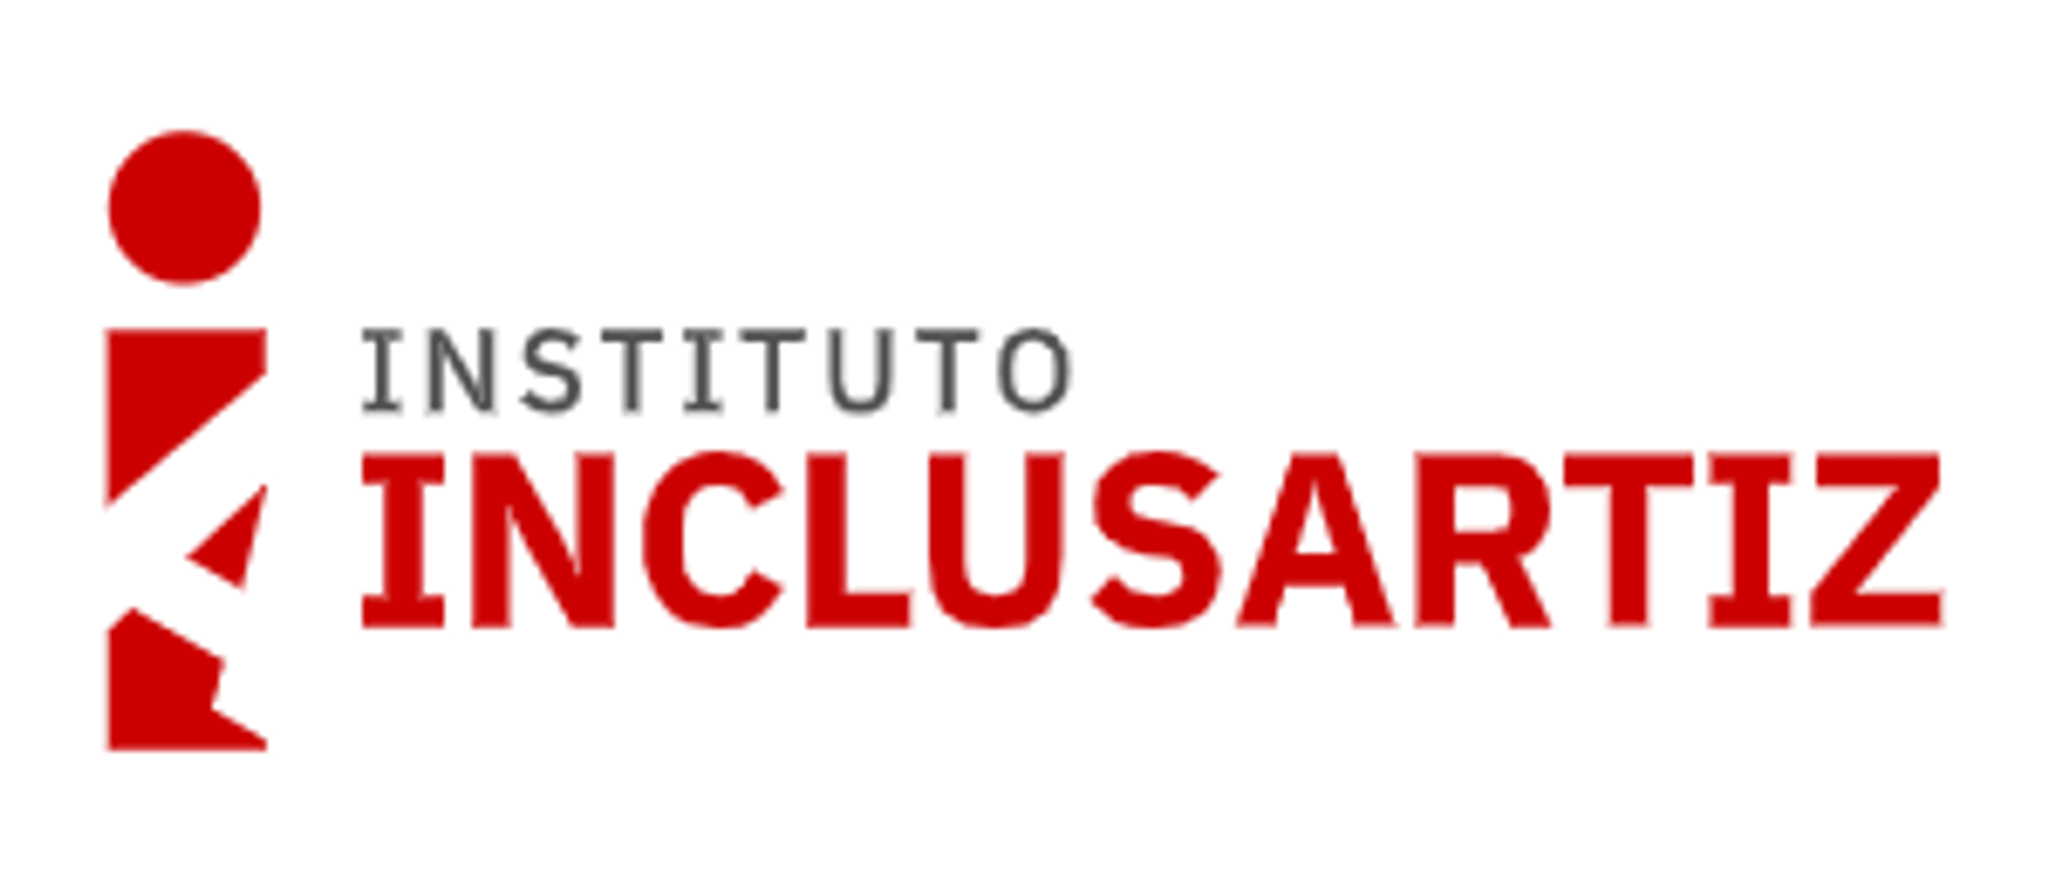 Instituto Inclusaritz logo, a large lower case letter i with the name of the organization.